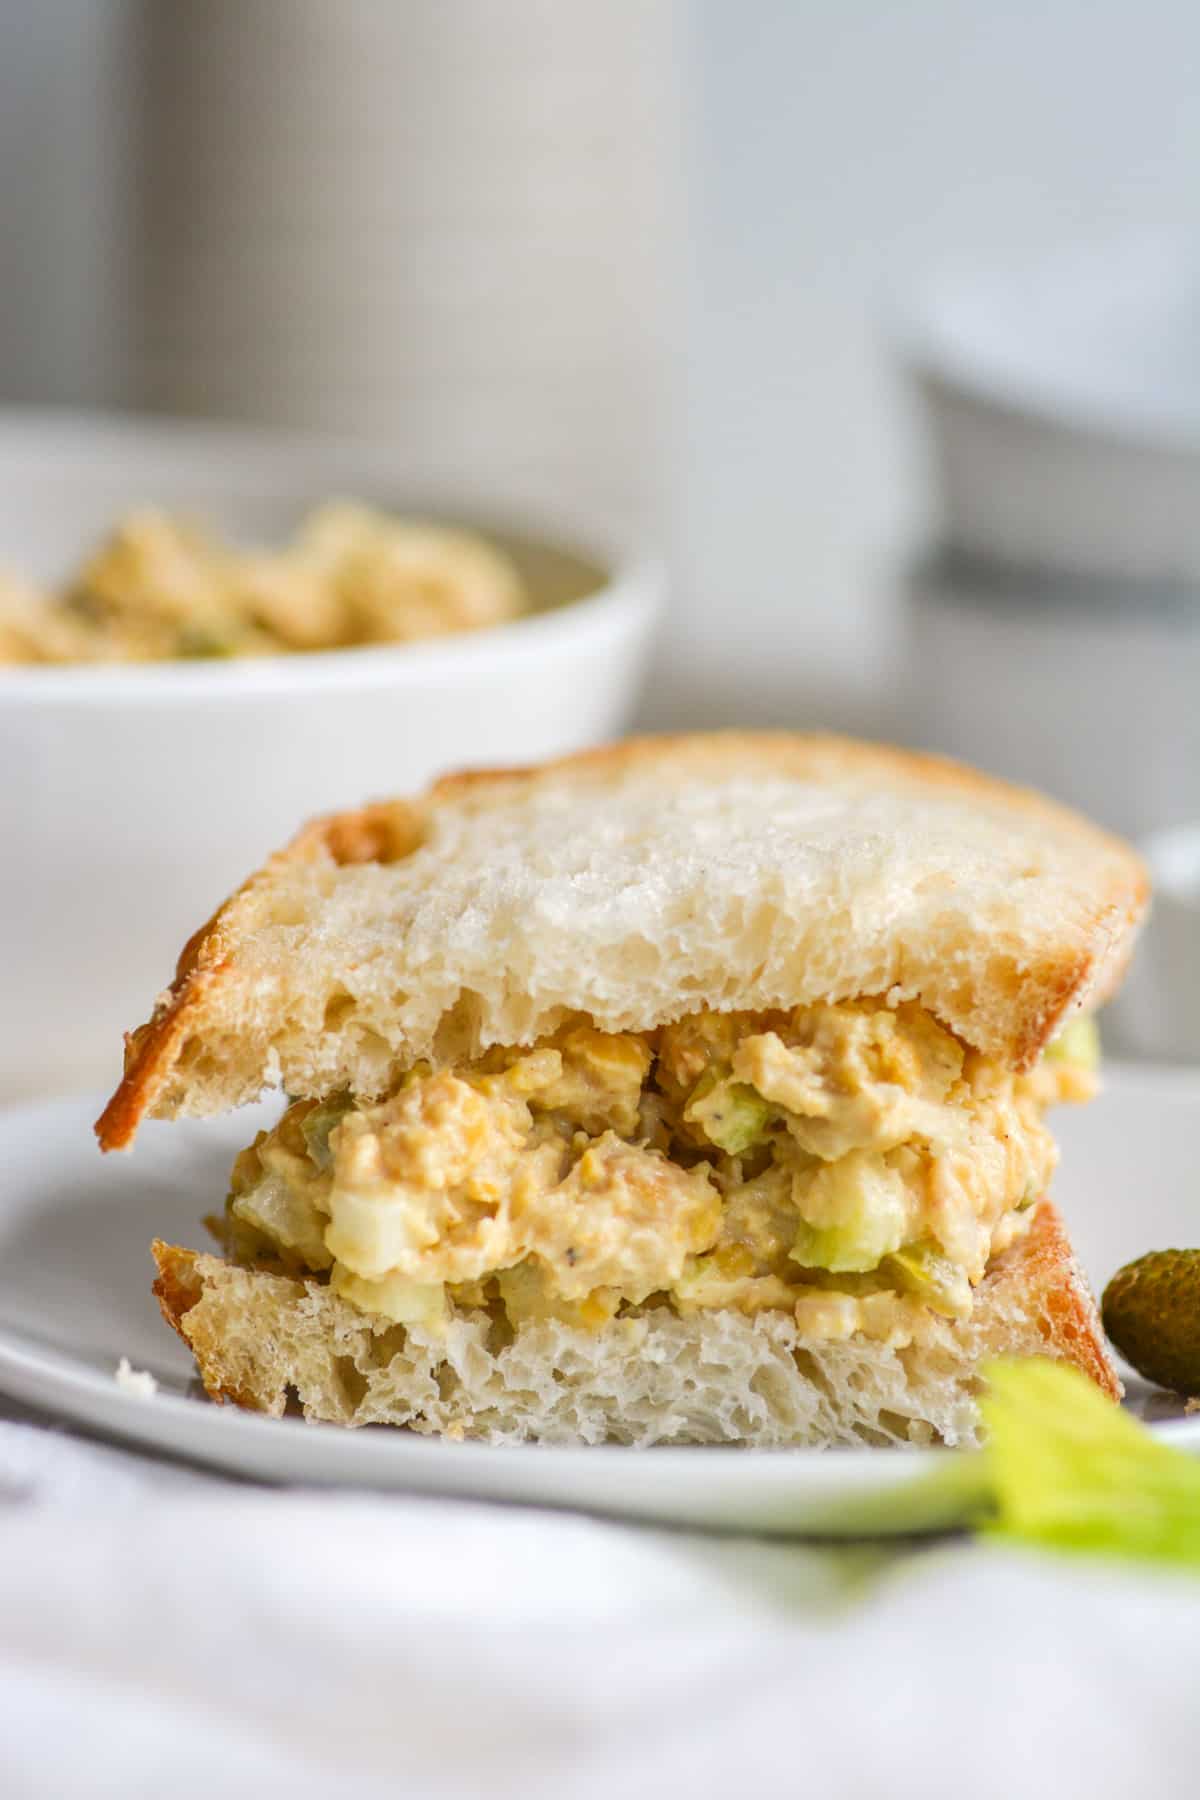 Vegan Chickpea Egg Salad on a sandwich on a white plate.